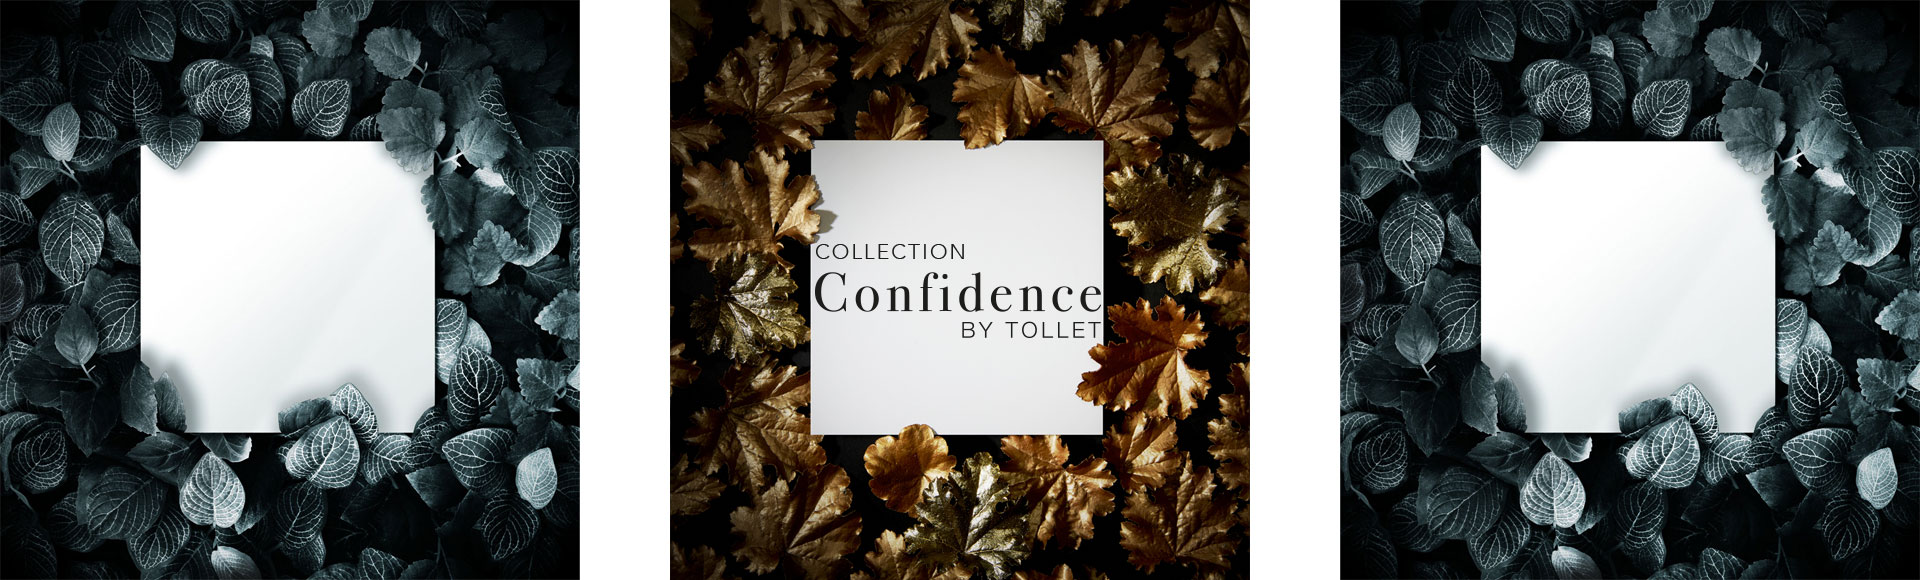 Tollet_Collection-Confidence